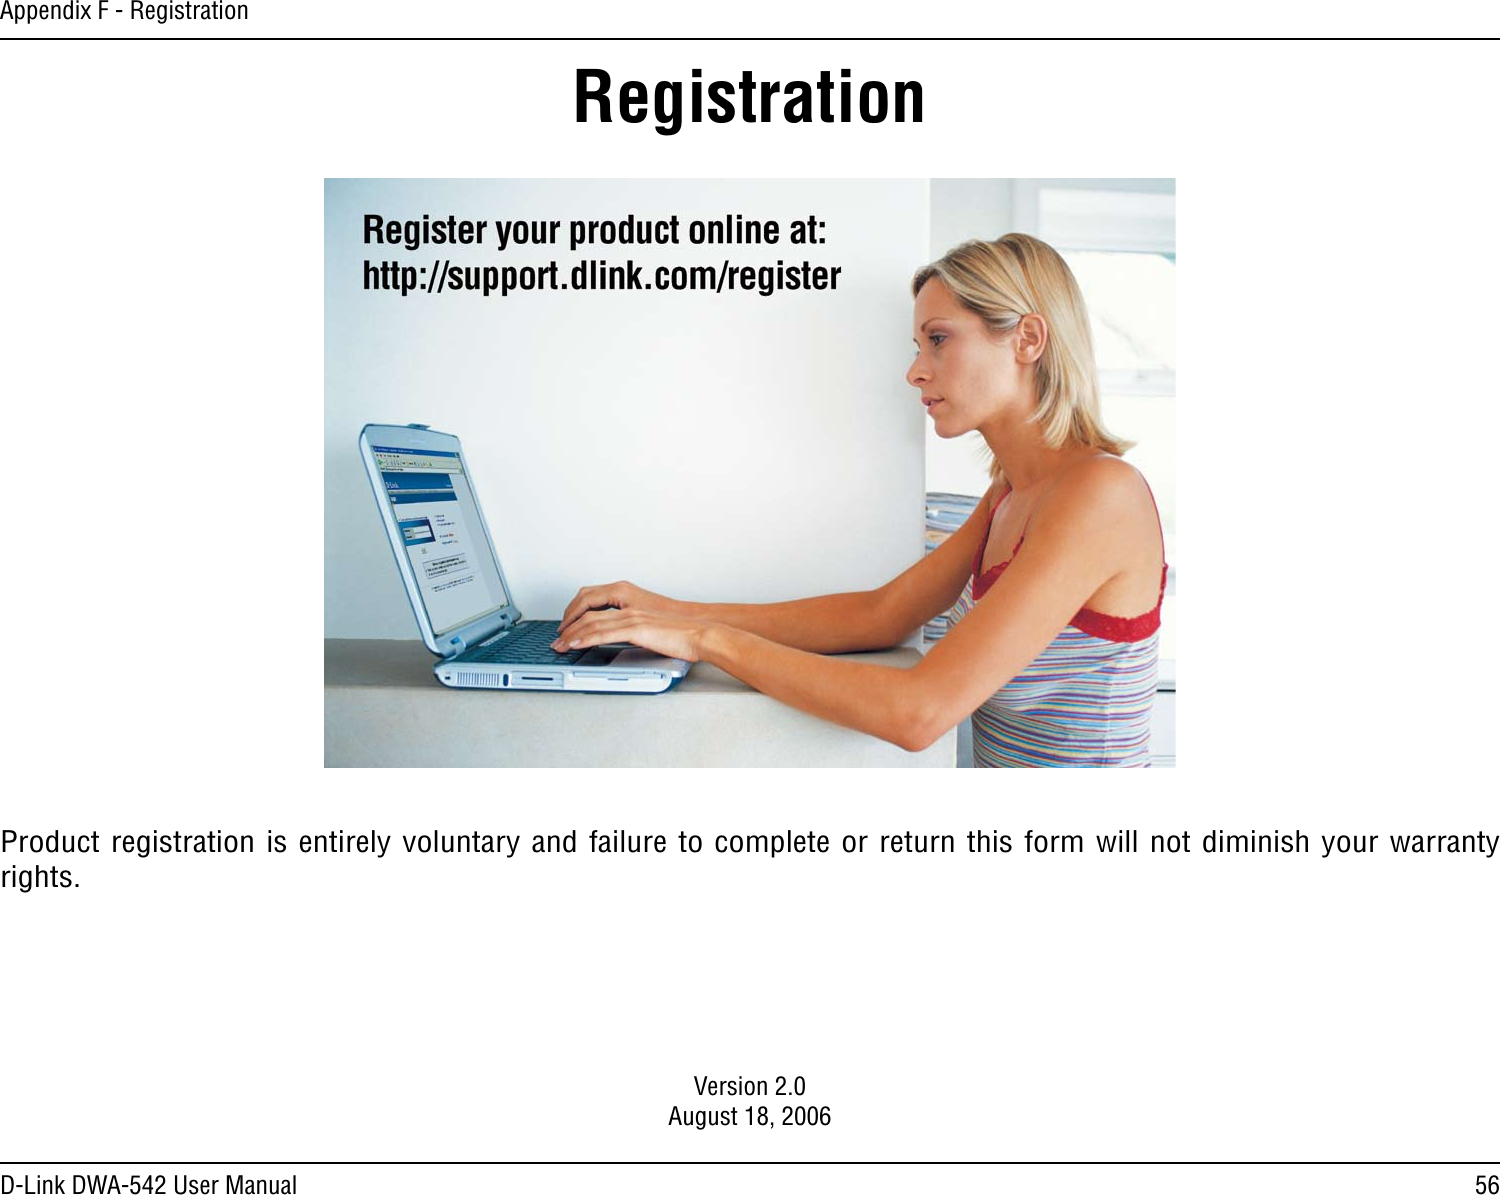 56D-Link DWA-542 User ManualAppendix F - RegistrationVersion 2.0August 18, 2006Product registration is entirely voluntary and failure to complete or return this form will not diminish your warranty rights.Registration